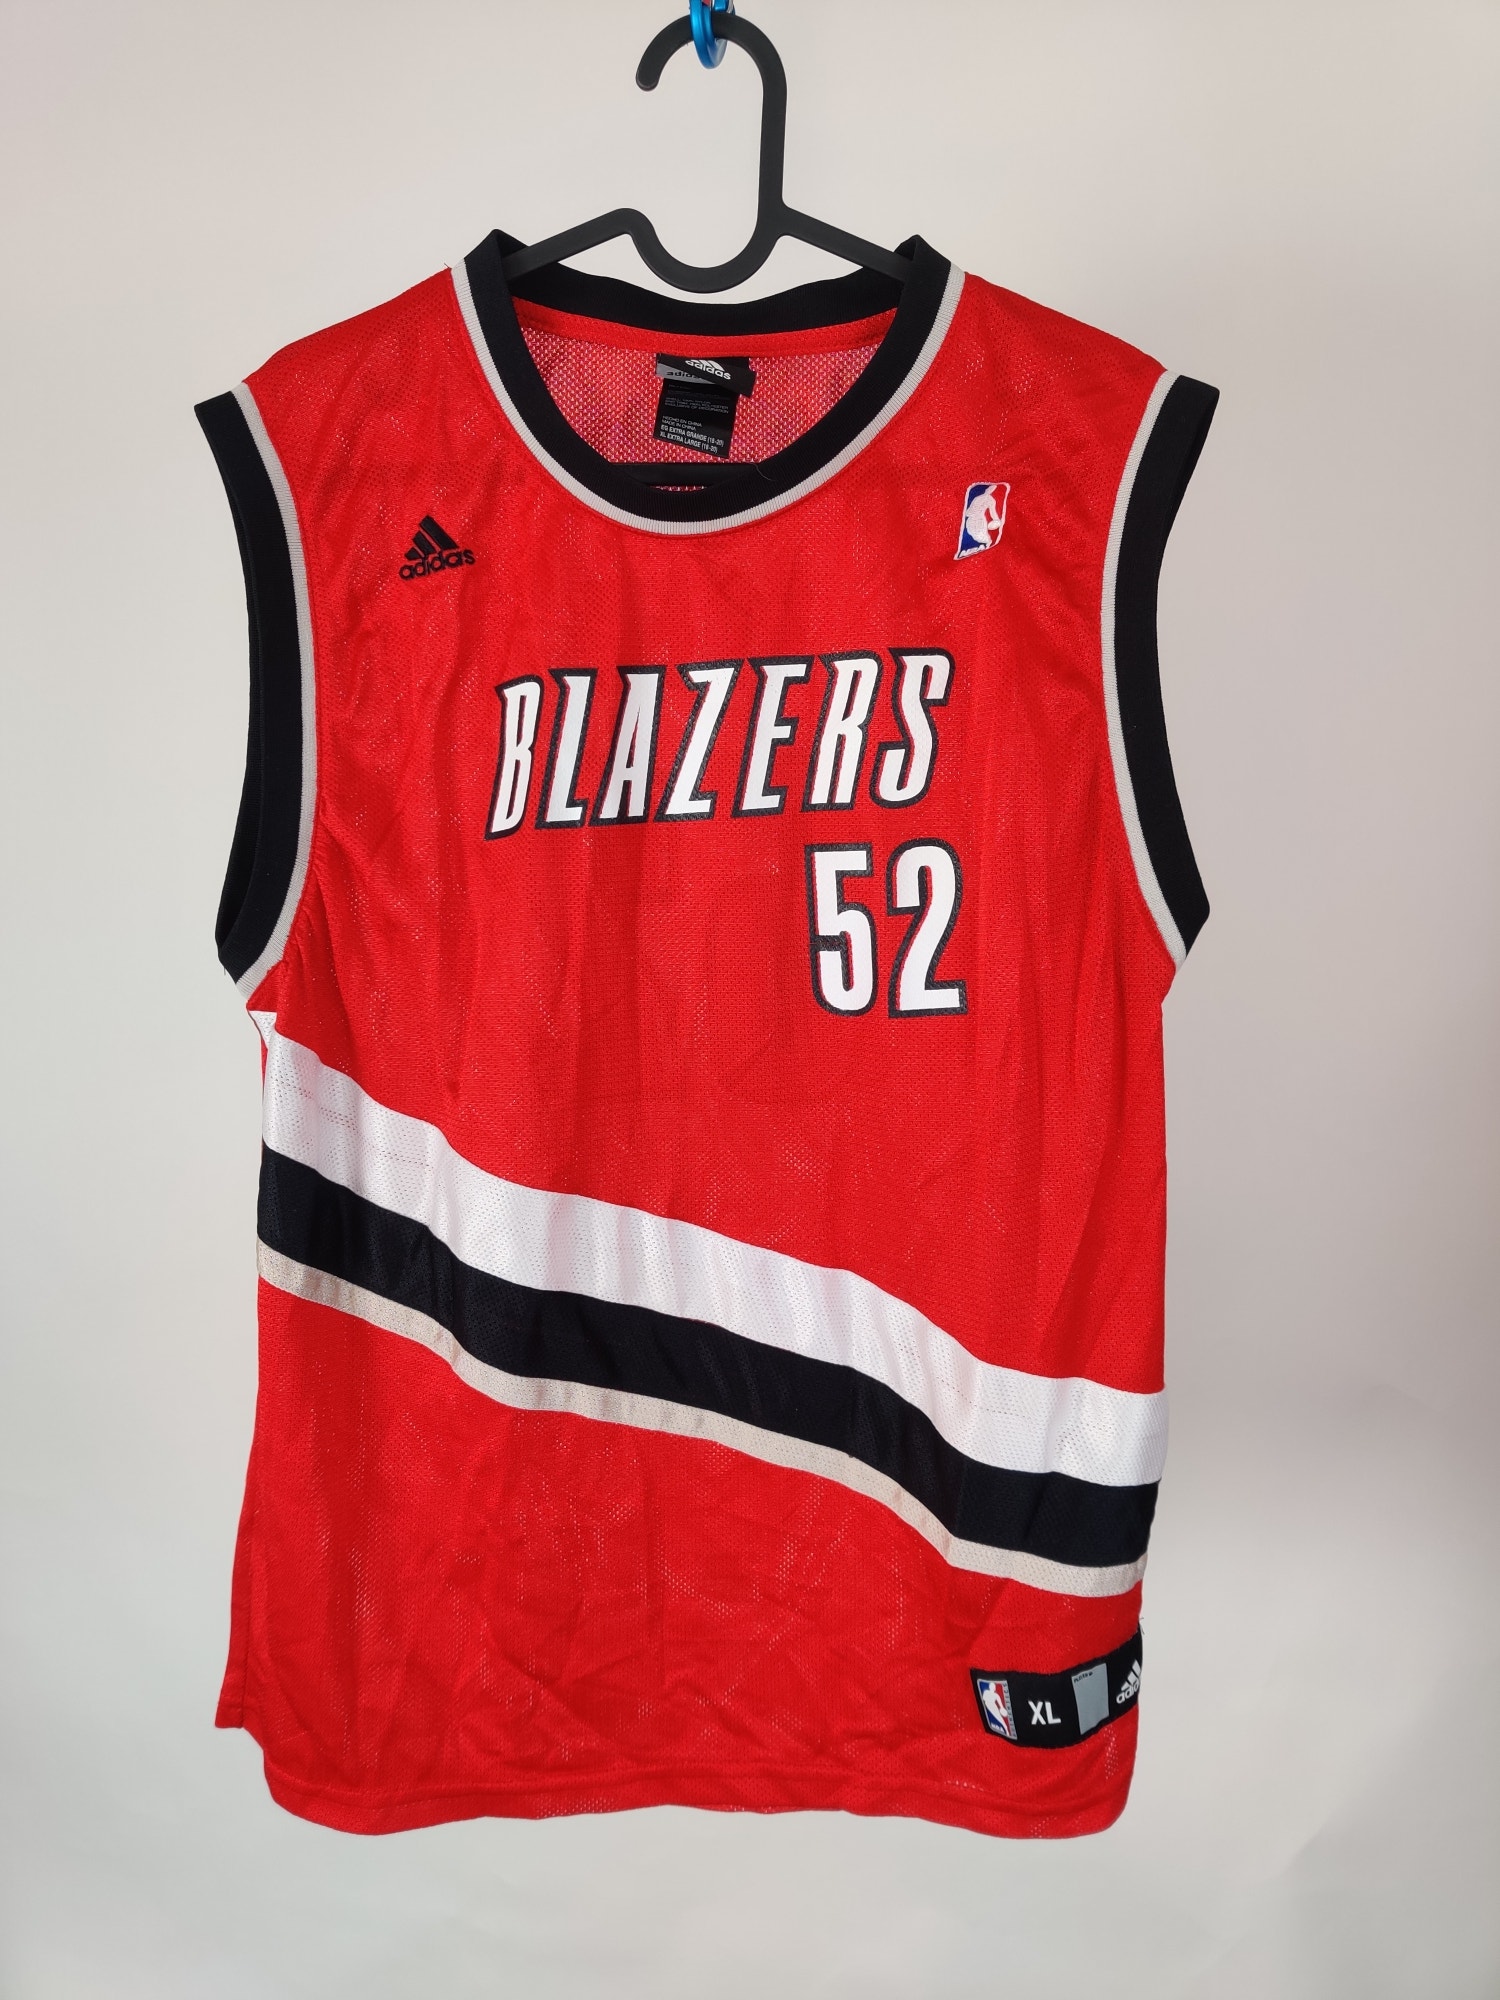 (V) Adidas NBA Portland Trail Blazers Youth jersey players Oden #52 sz XL  - Picture 1 of 11